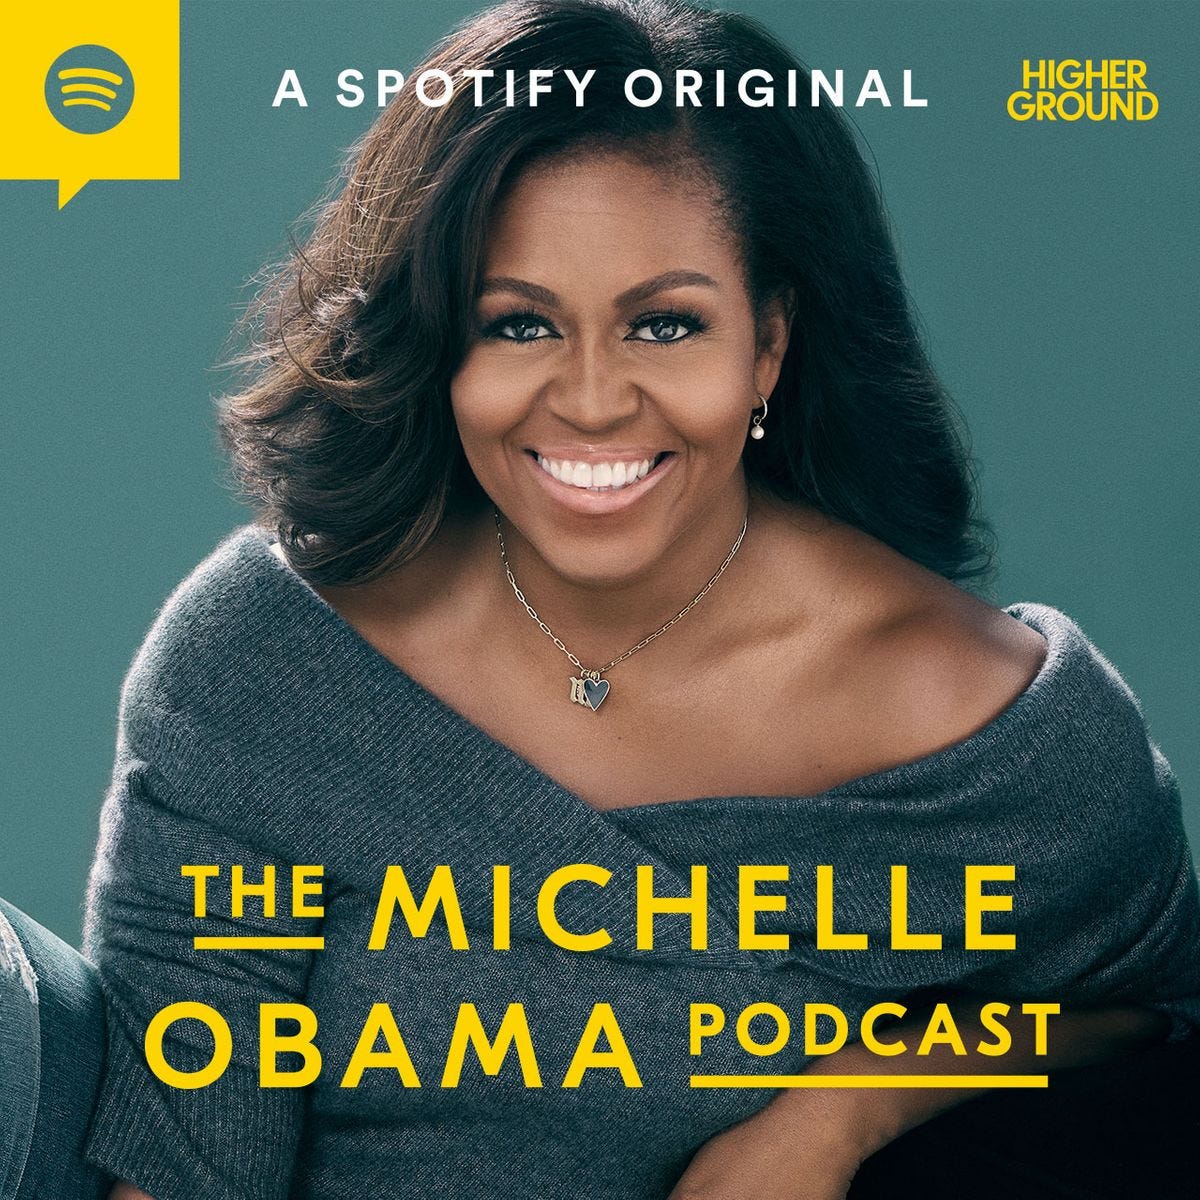 Michelle Obama's Spotify Podcast: Review